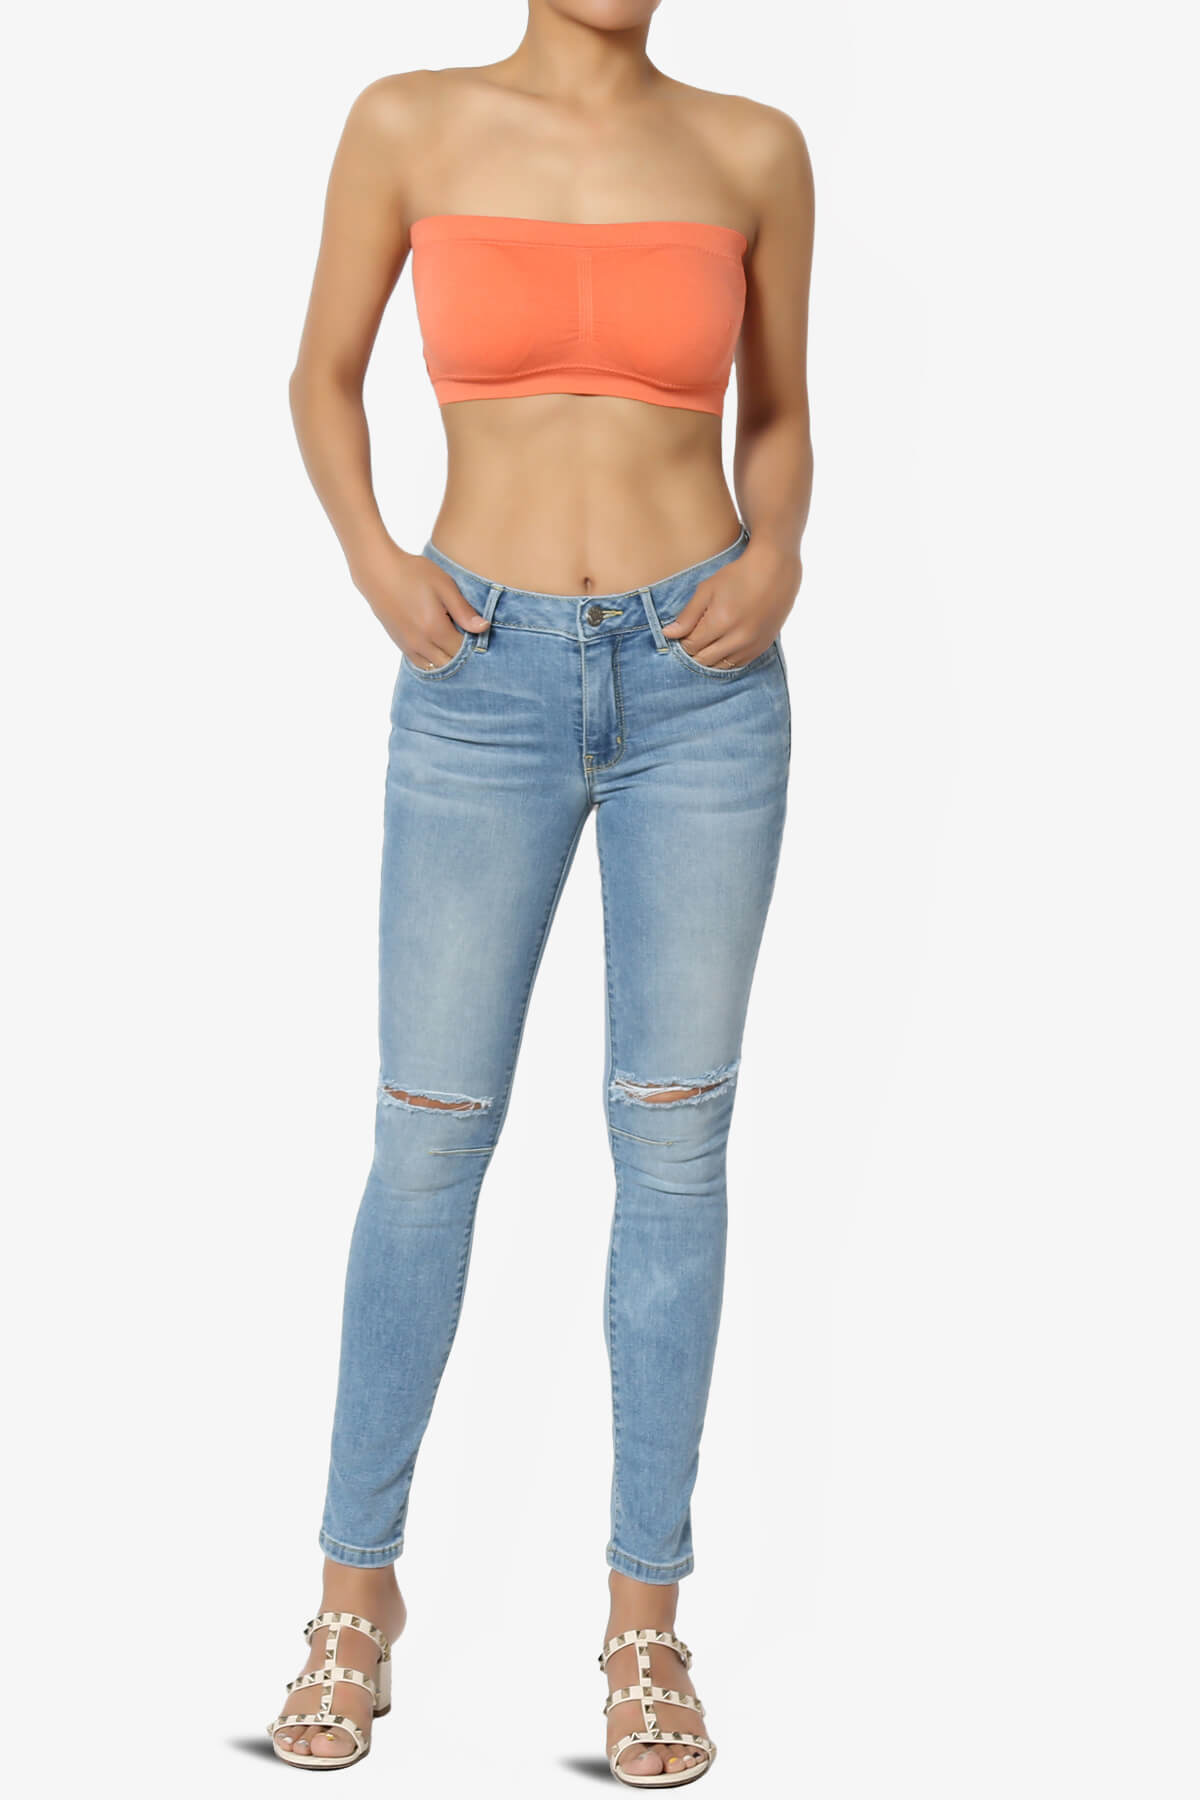 Candid Removable Pad Bandeau Bra Top CORAL_6